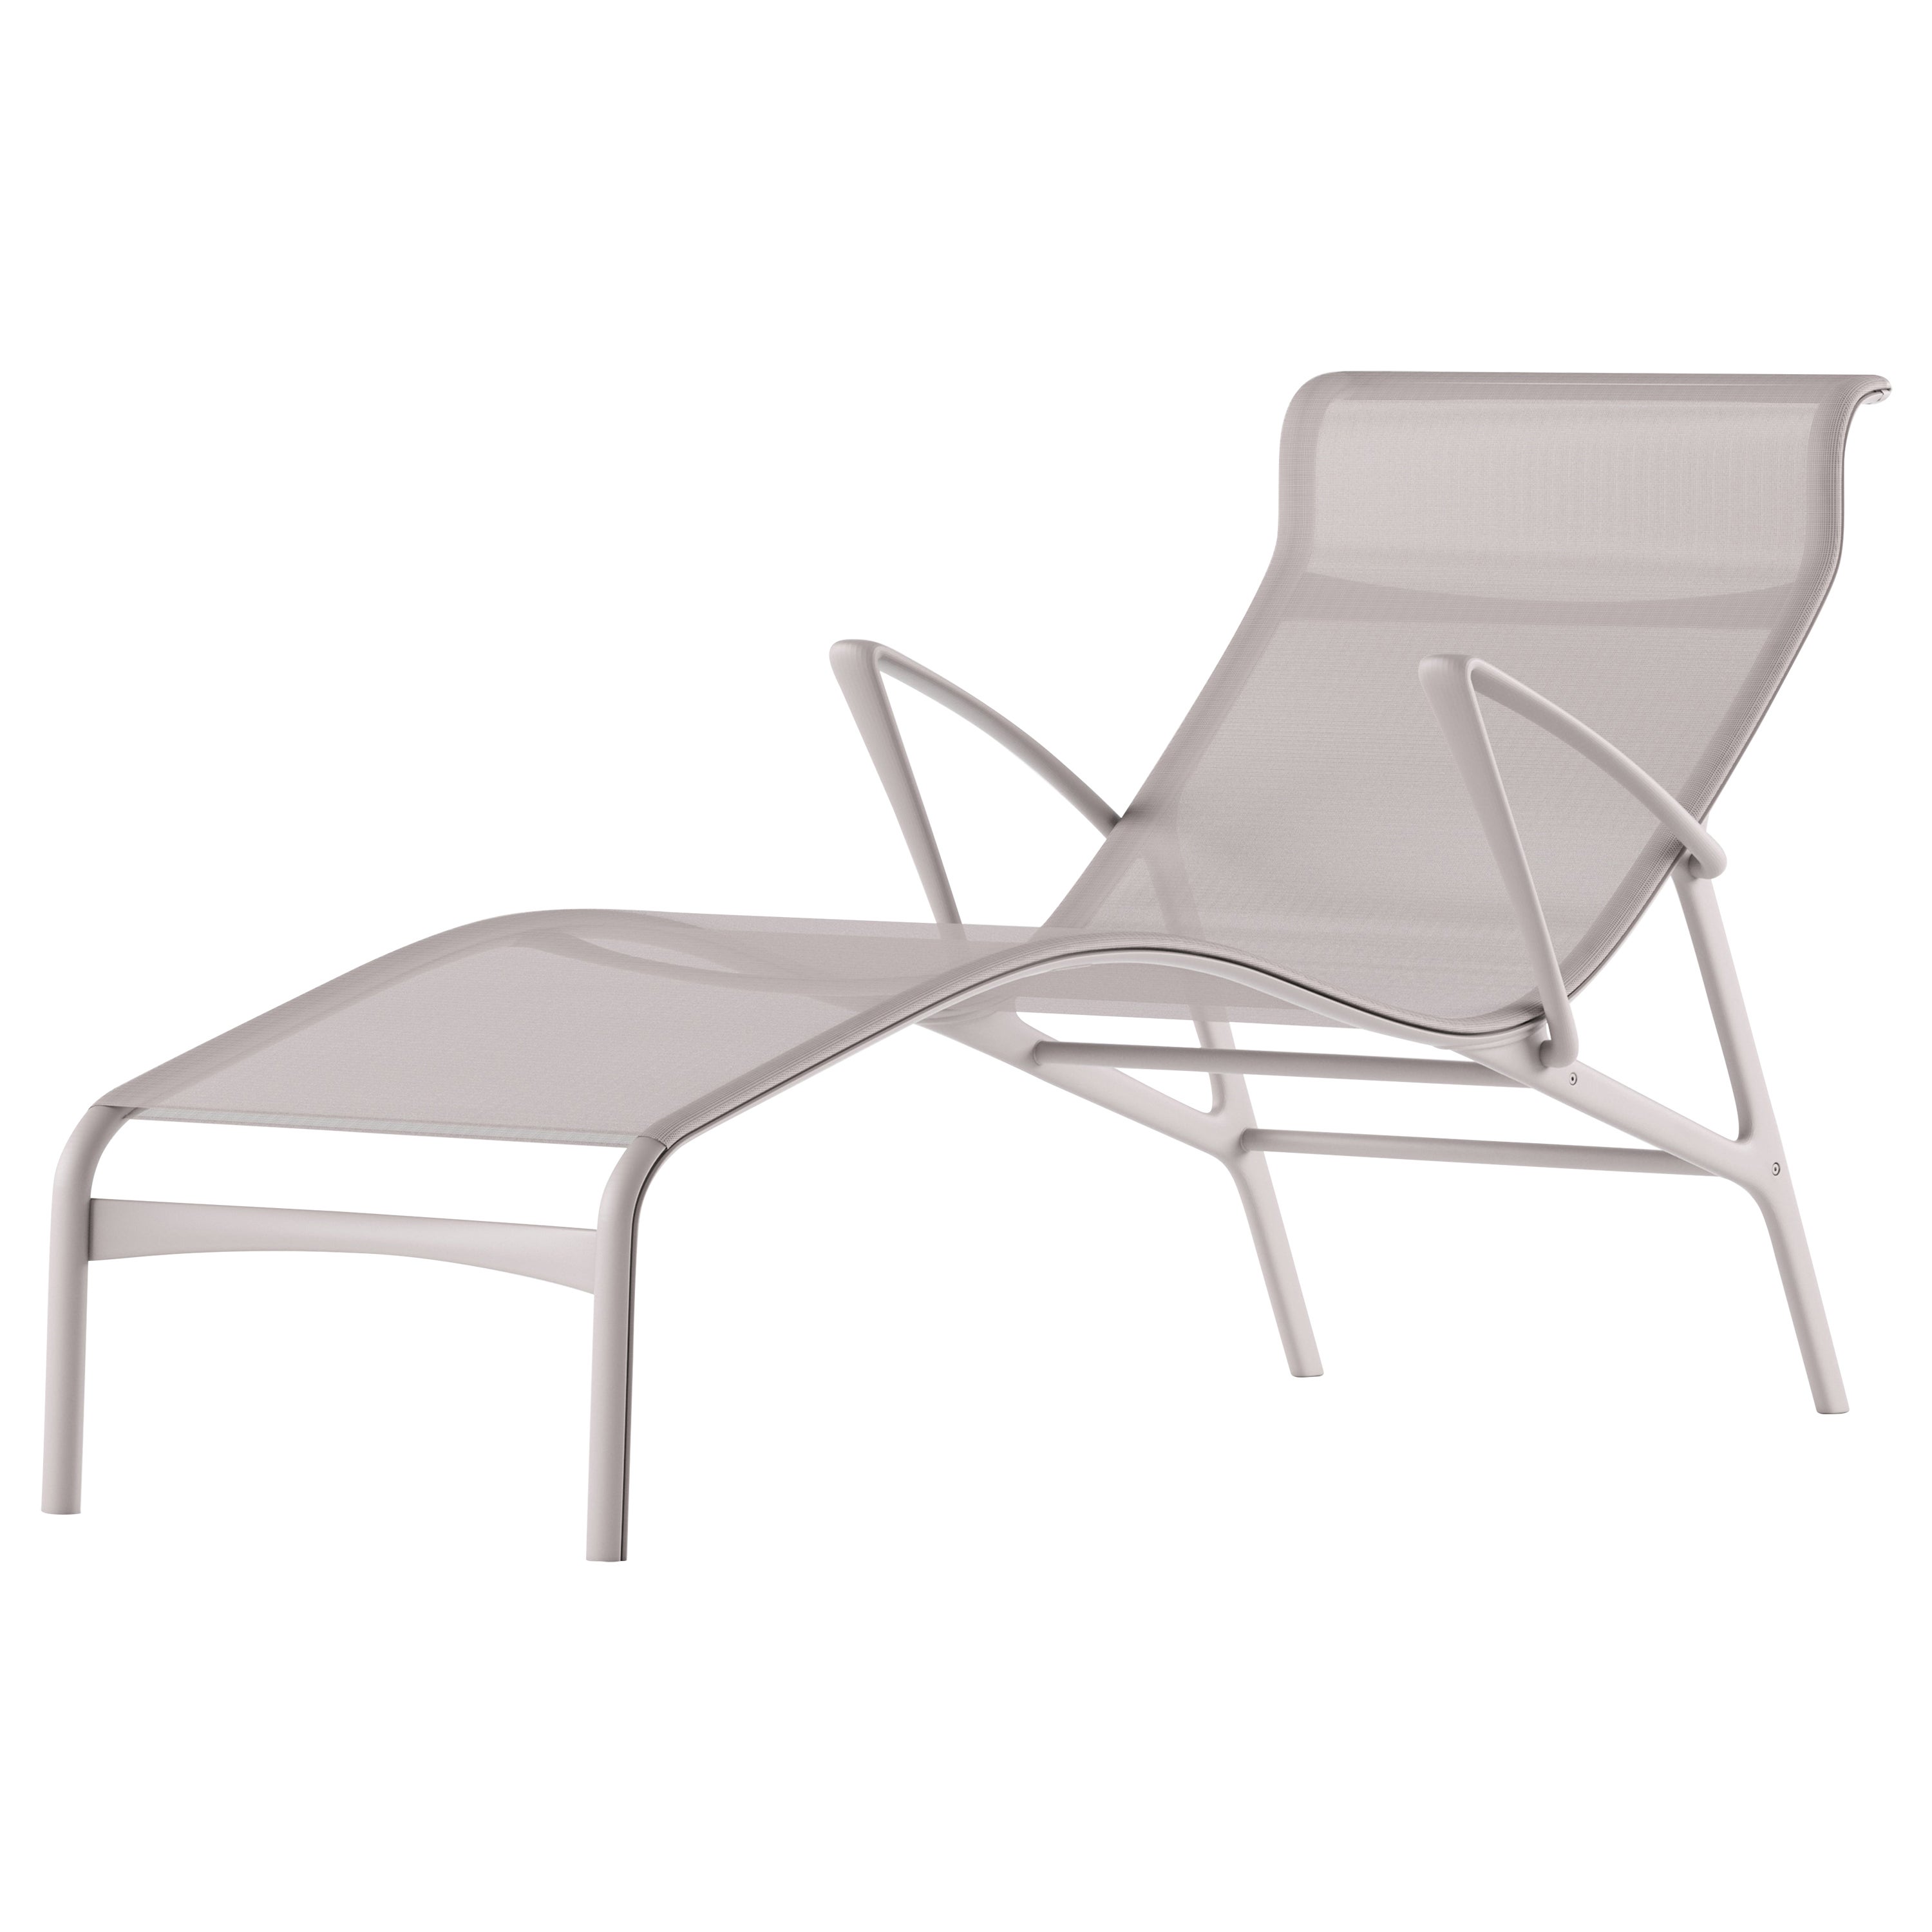 Alias 439 Longframe Outdoor Chaise Longue in Sand Mesh with Lacquered Frame For Sale